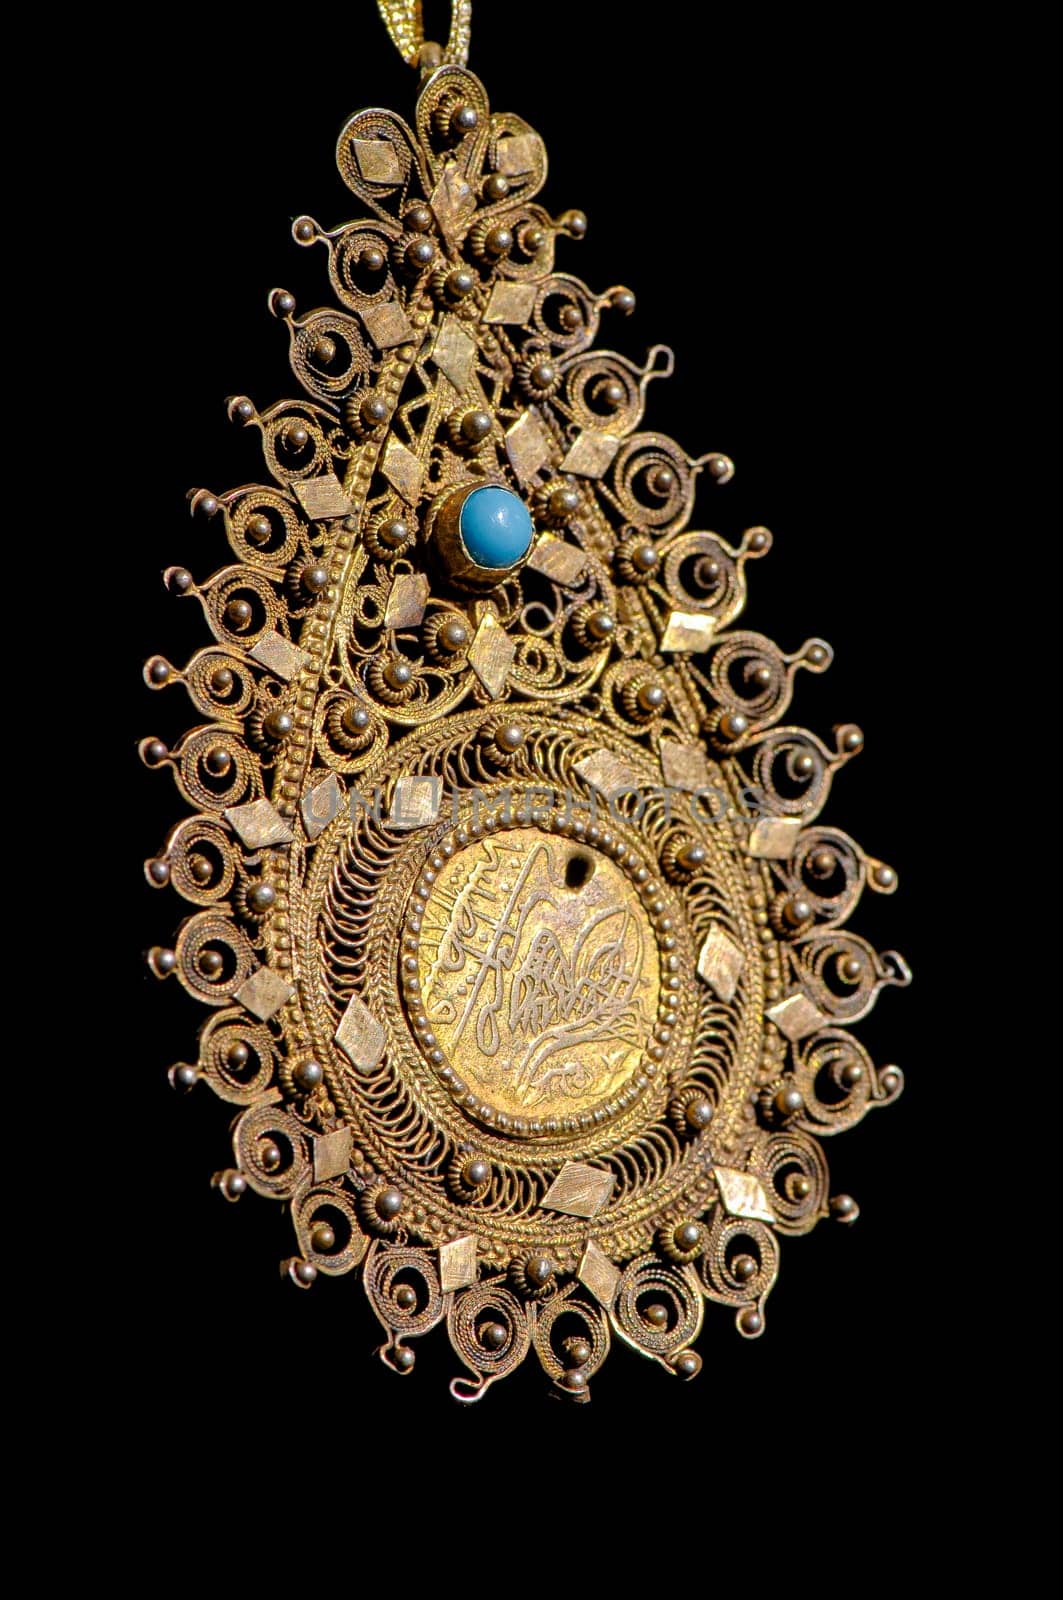 A Vintage, fancy jewelry pendant with precious stones isolated on a black background, vertical by A_Karim